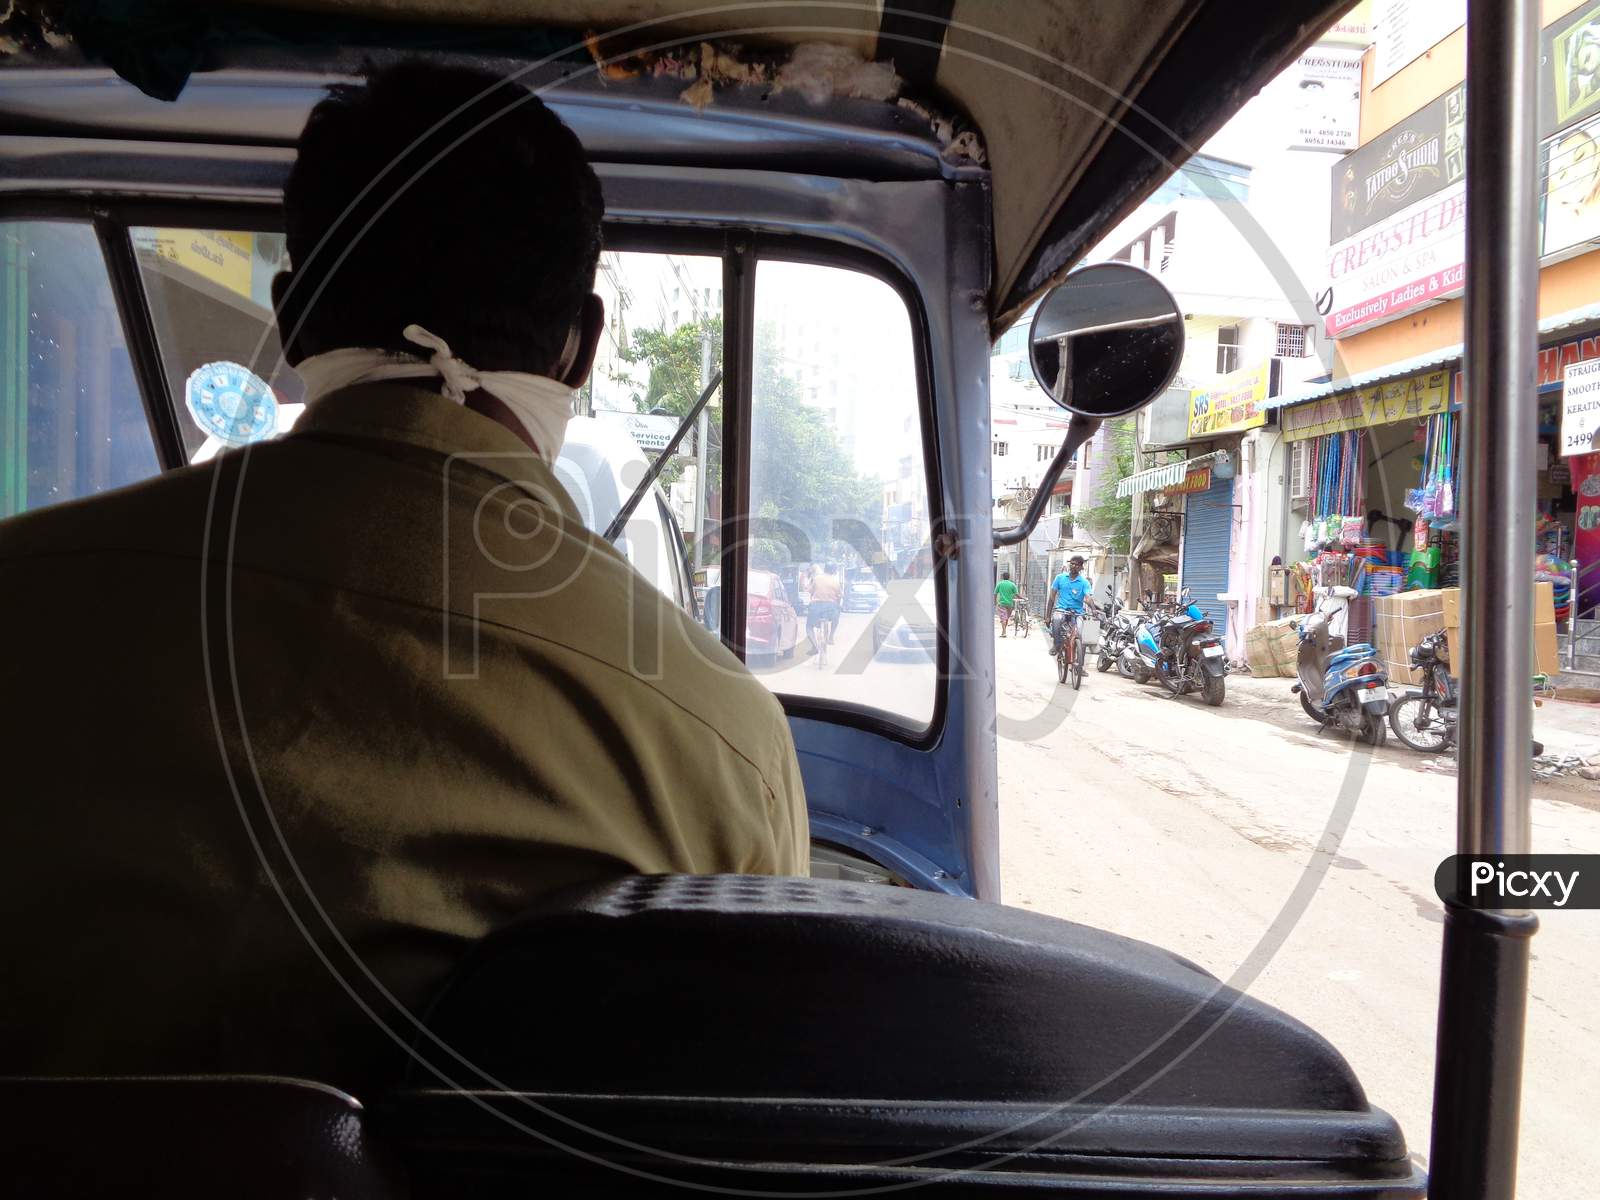 desperate auto rickshaw driver in search of passengers in the times of pandemic